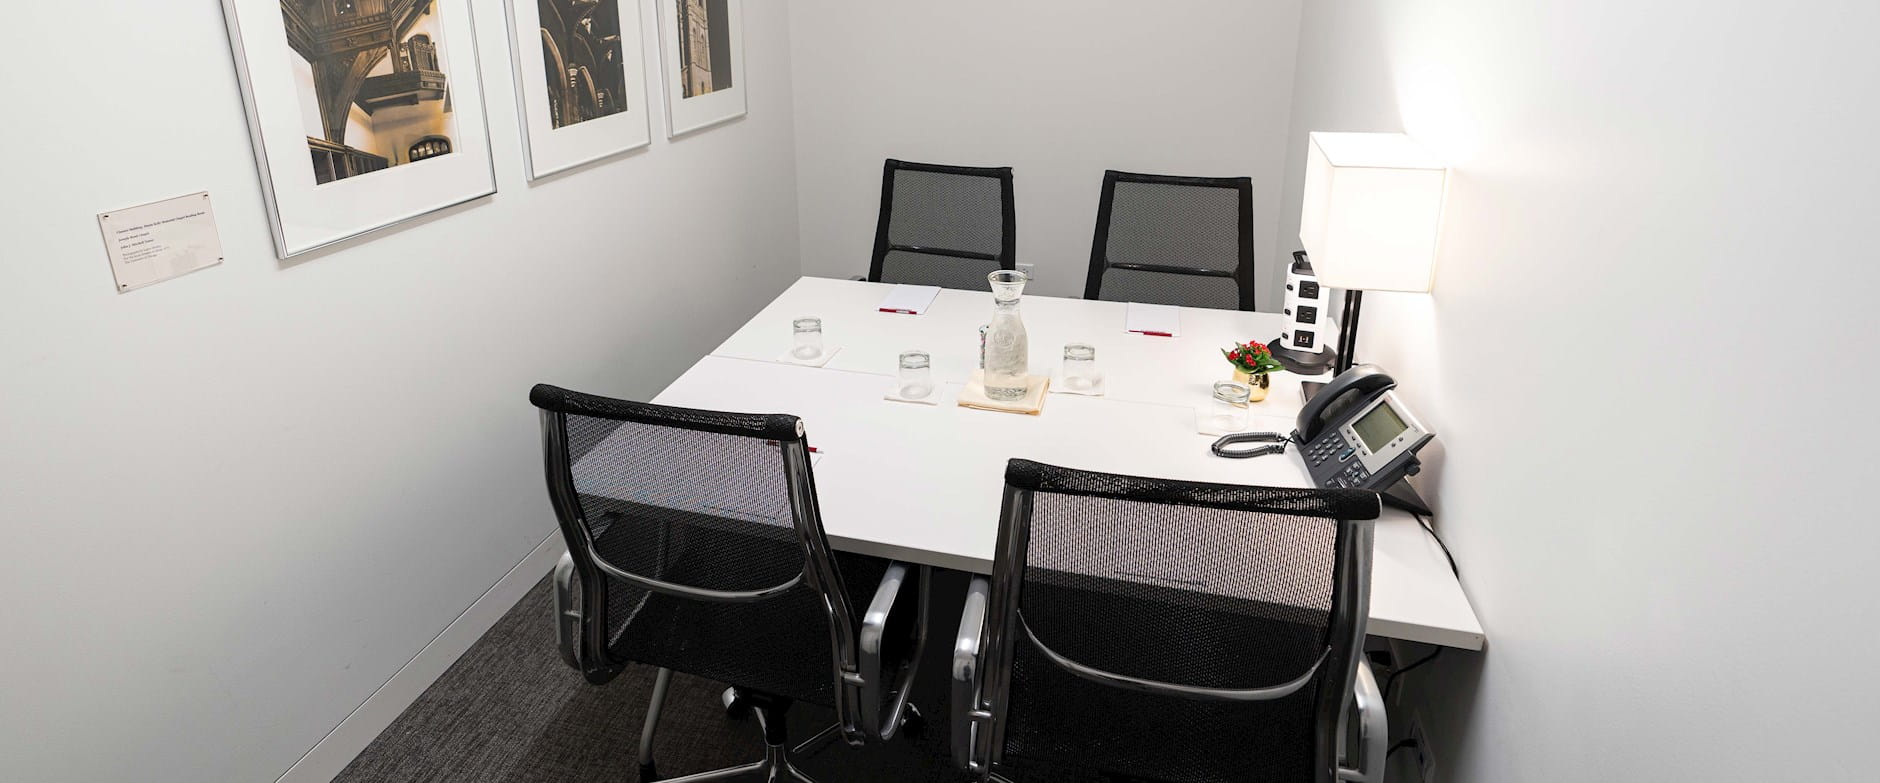 PIMCO small executive board room with 4-person table set with water, notepads, and outlets